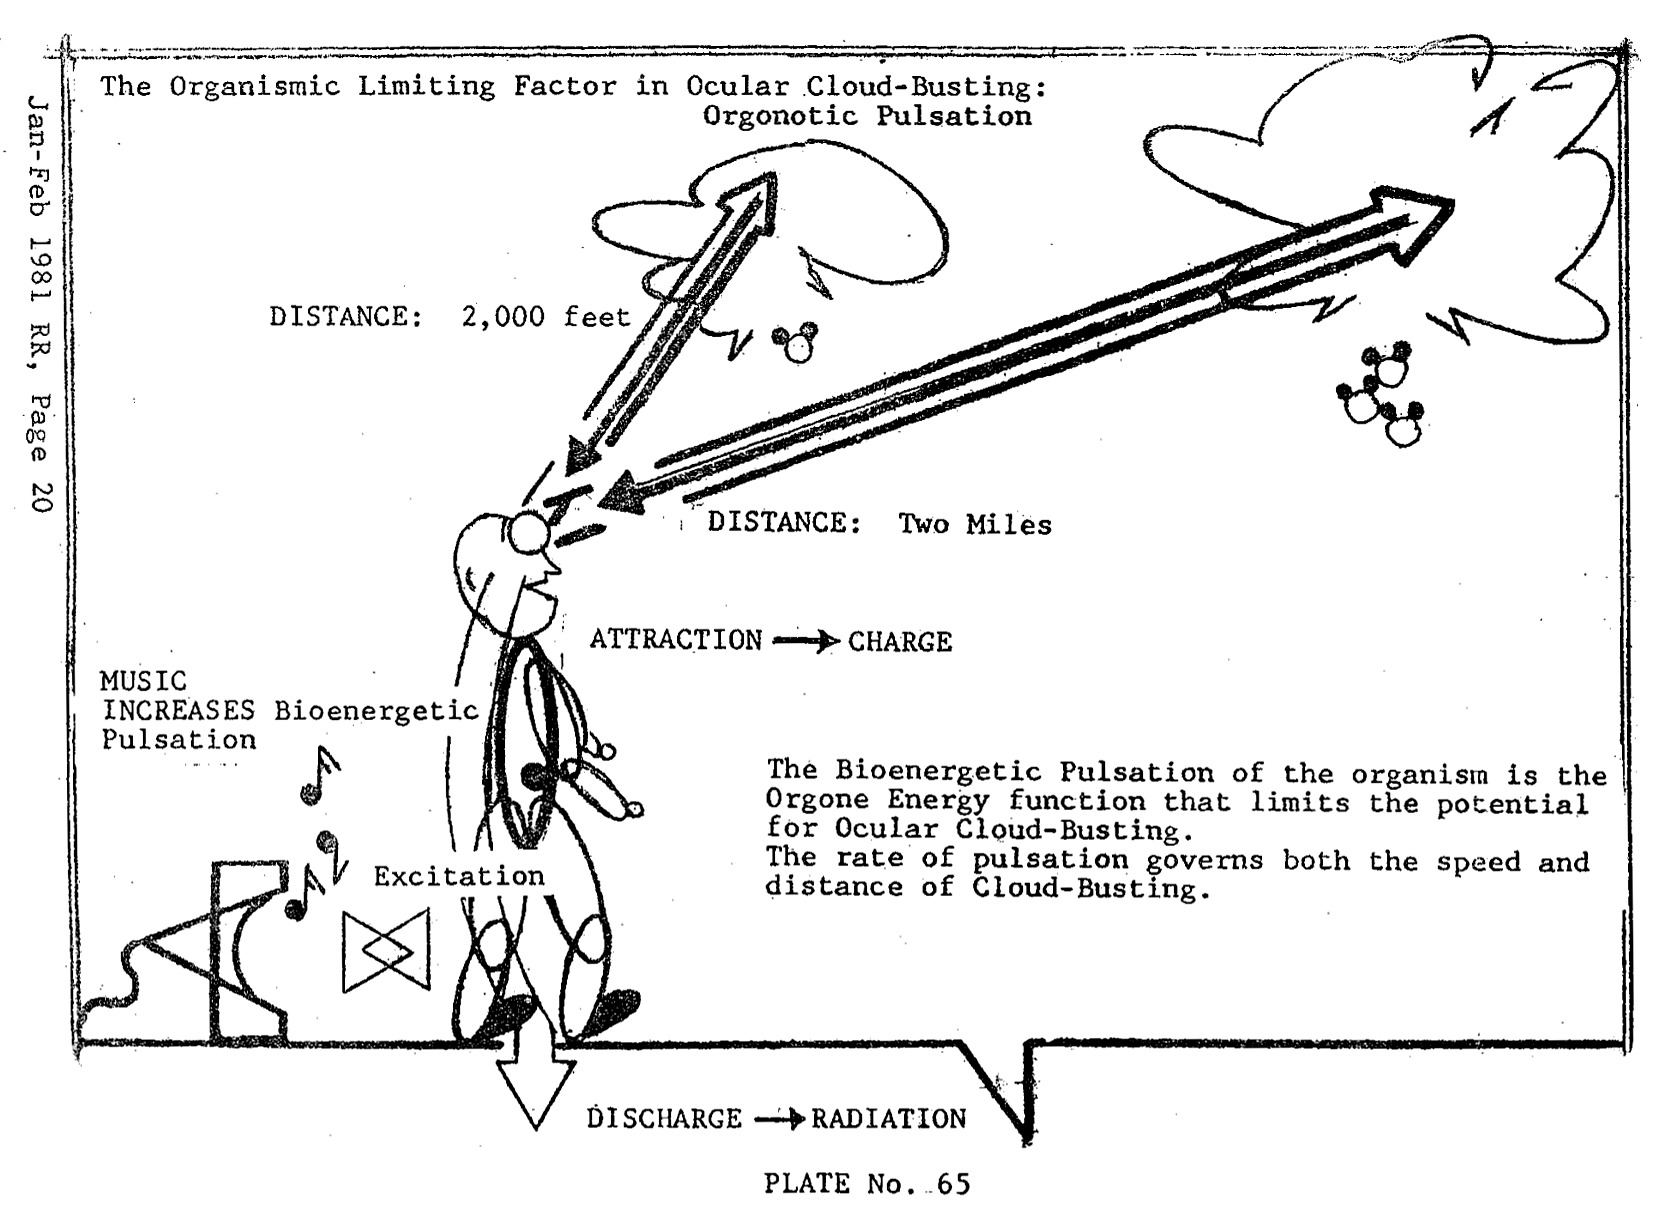 Diagram of Weber's theory of ocular cloudbusting.